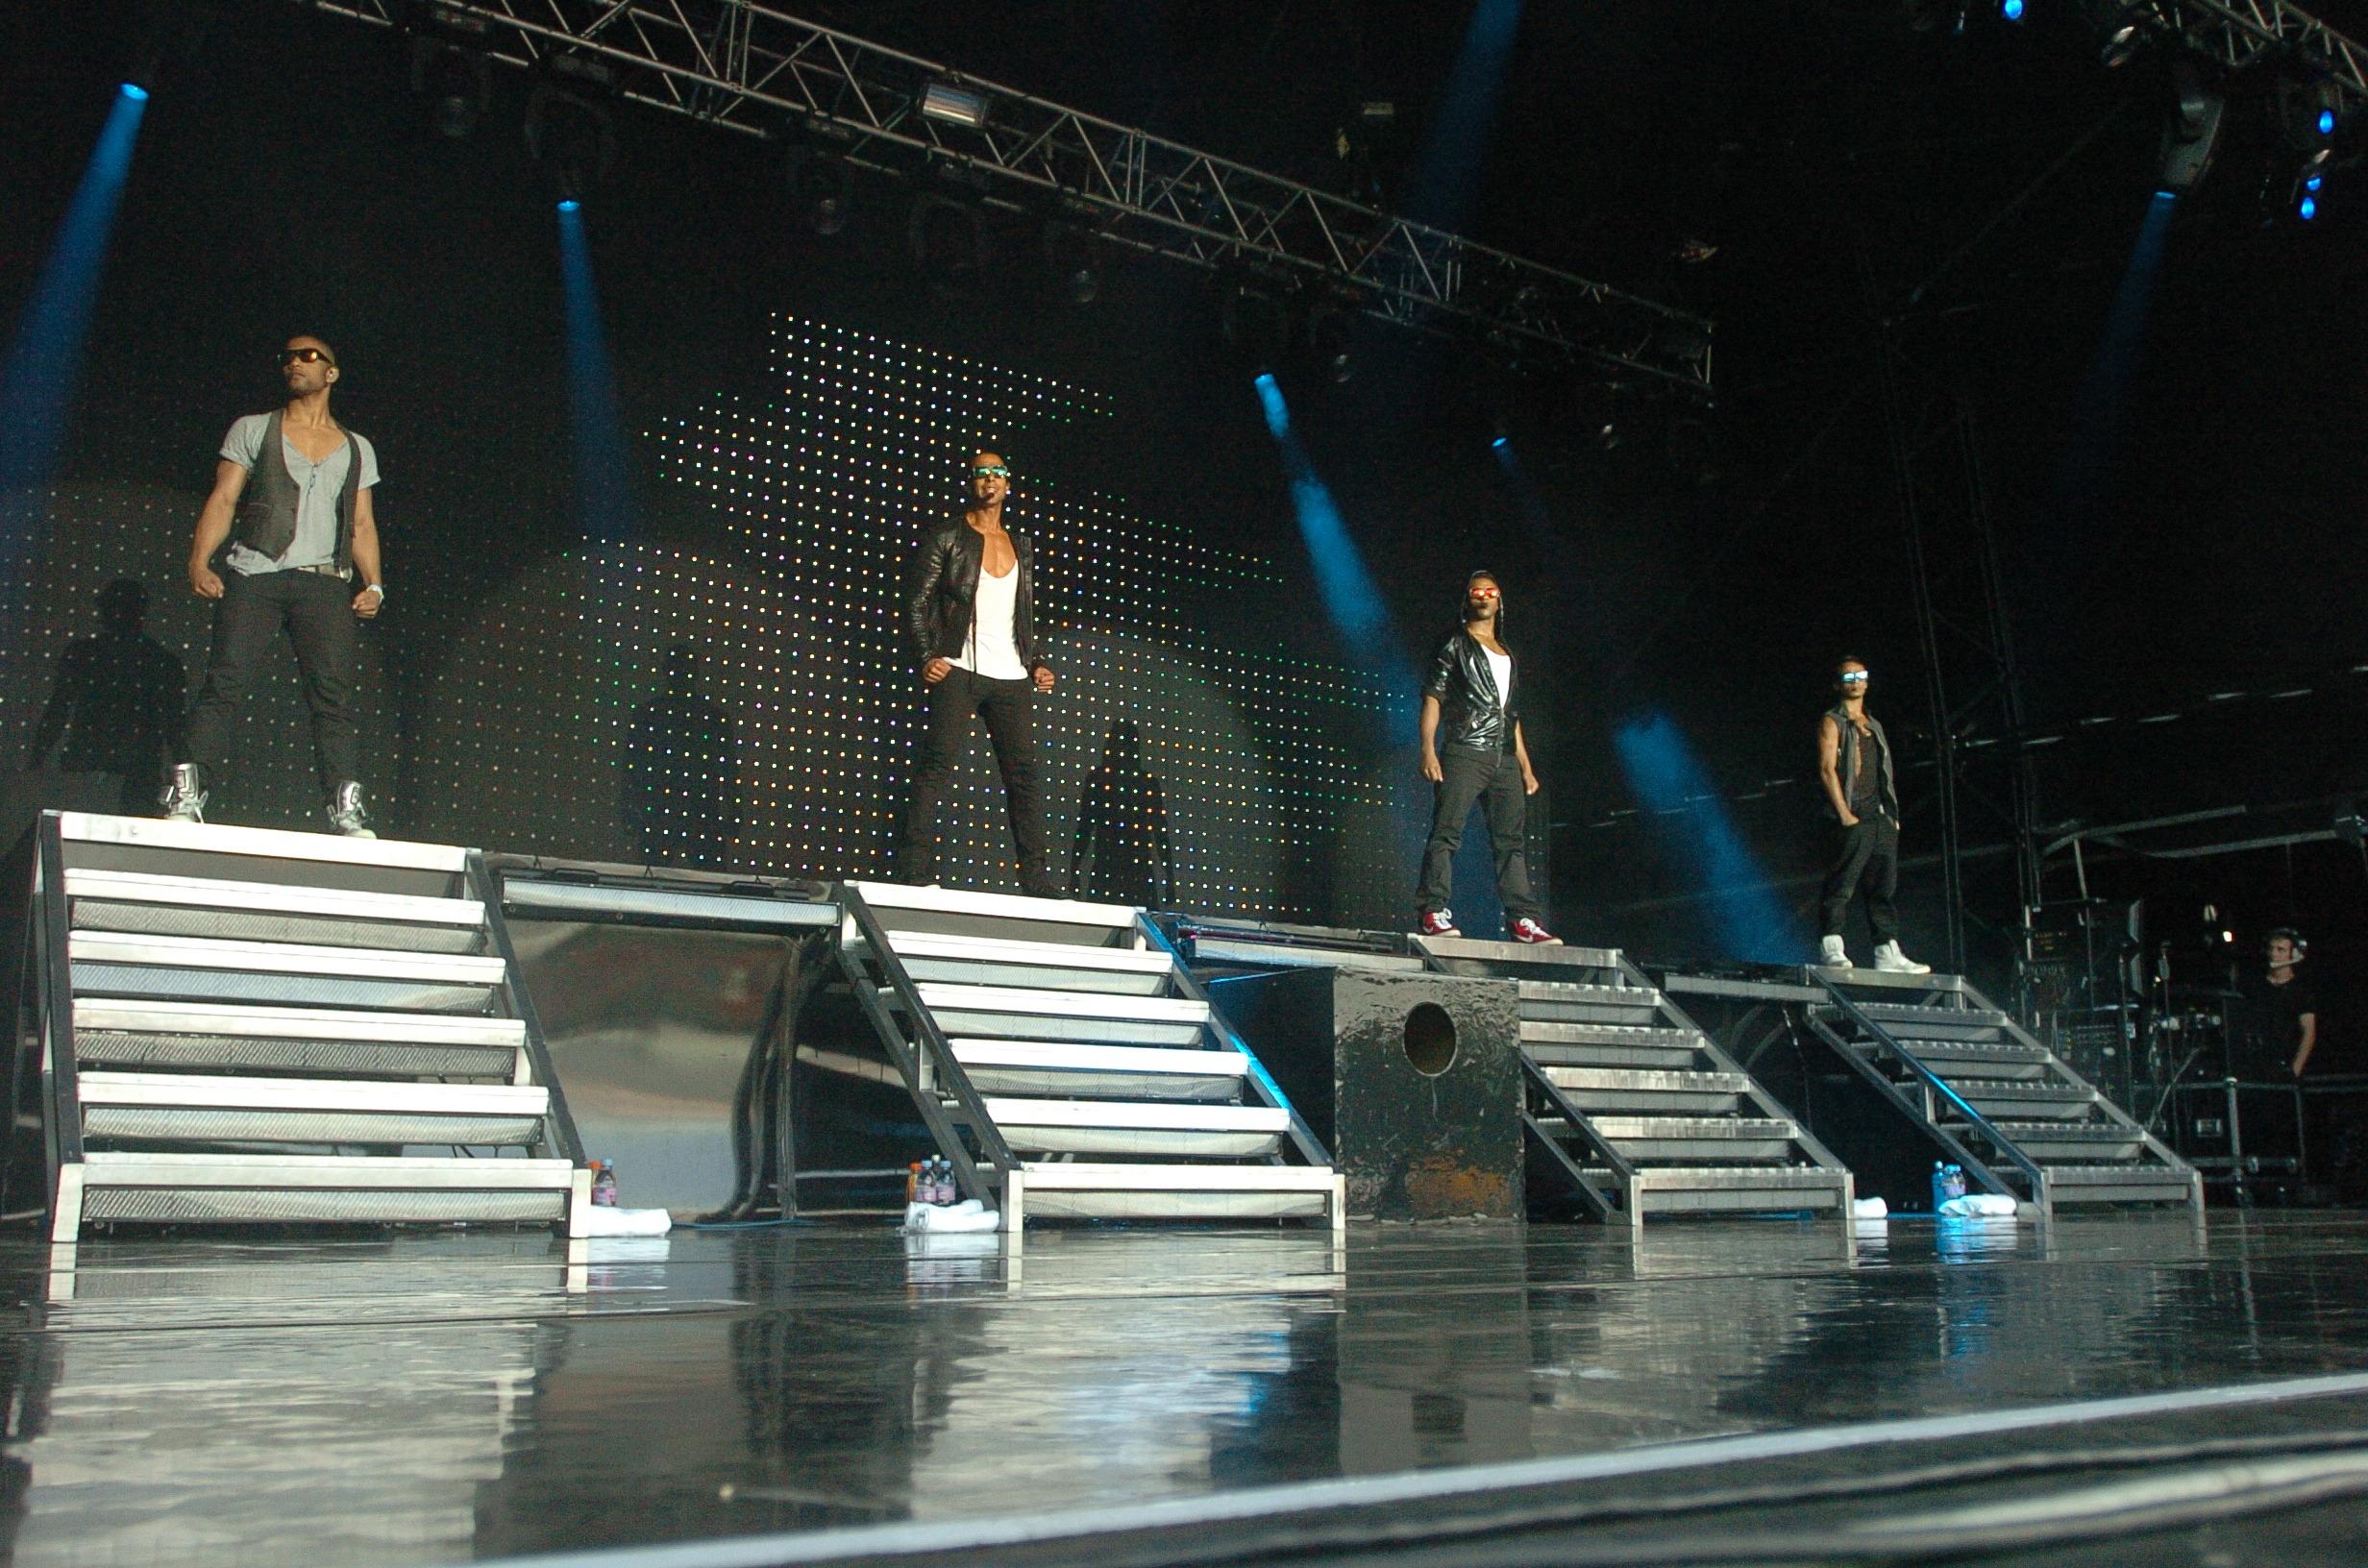 JLS with Aston Merrygold are pictured preforming on the embankment in Peterborough